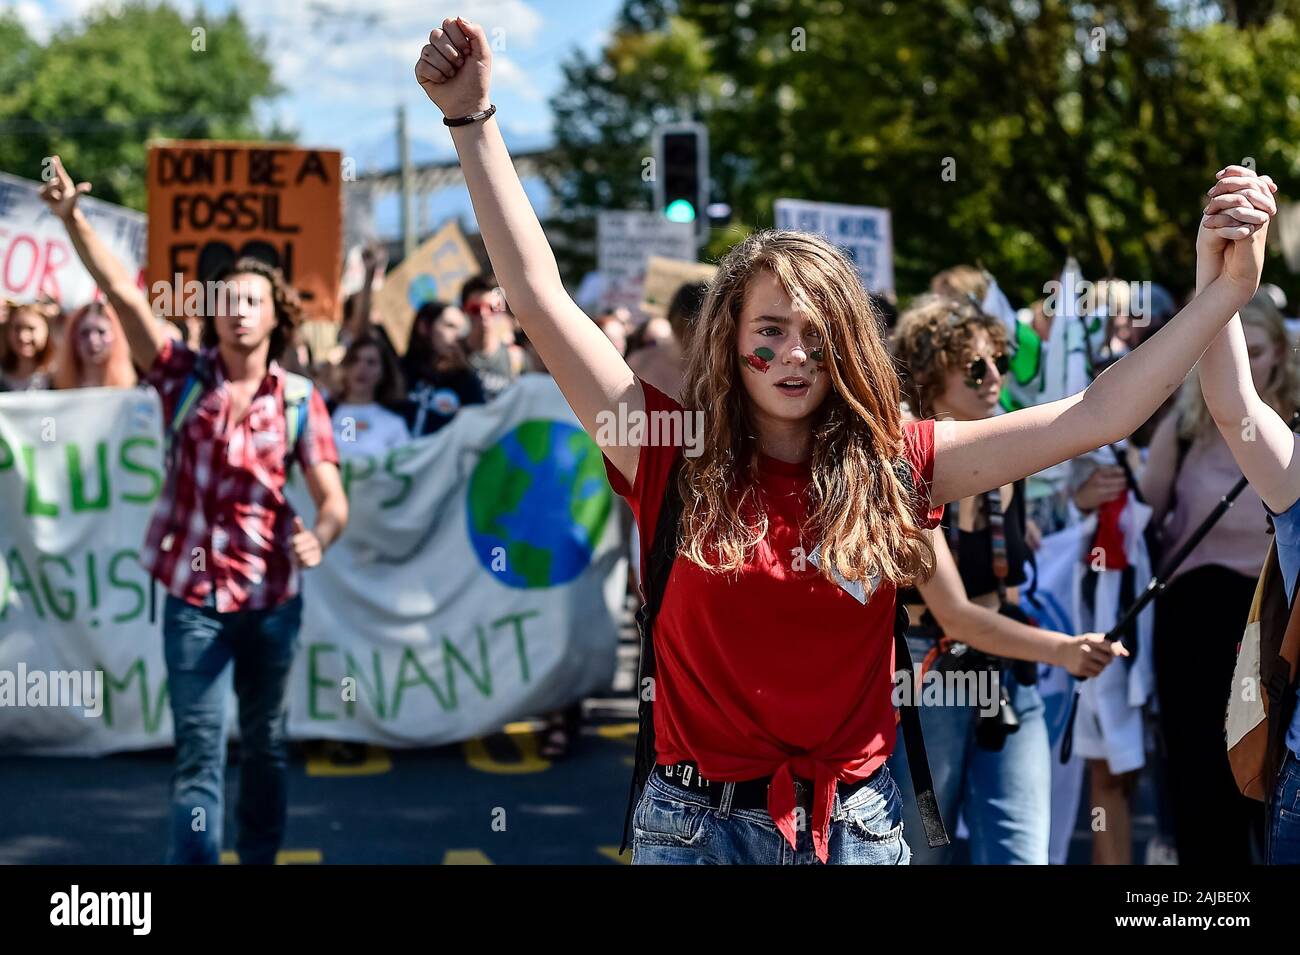 Lausanne, Switzerland - 09 August, 2019: A climate activist attend a Fridays For Future strike for climate protection that is part of 'SMILE for Future' event. More than 450 young climate activists from different European countries gathered to attend the summit 'SMILE for Future', that stands for Summer Meeting in Lausanne Europe. The aim of the summit is to reinforce the links between the participants of the European Youth Climate Strike movement and to define the future of the mobilisation against climate change. Credit: Nicolò Campo/Alamy Live News Stock Photo